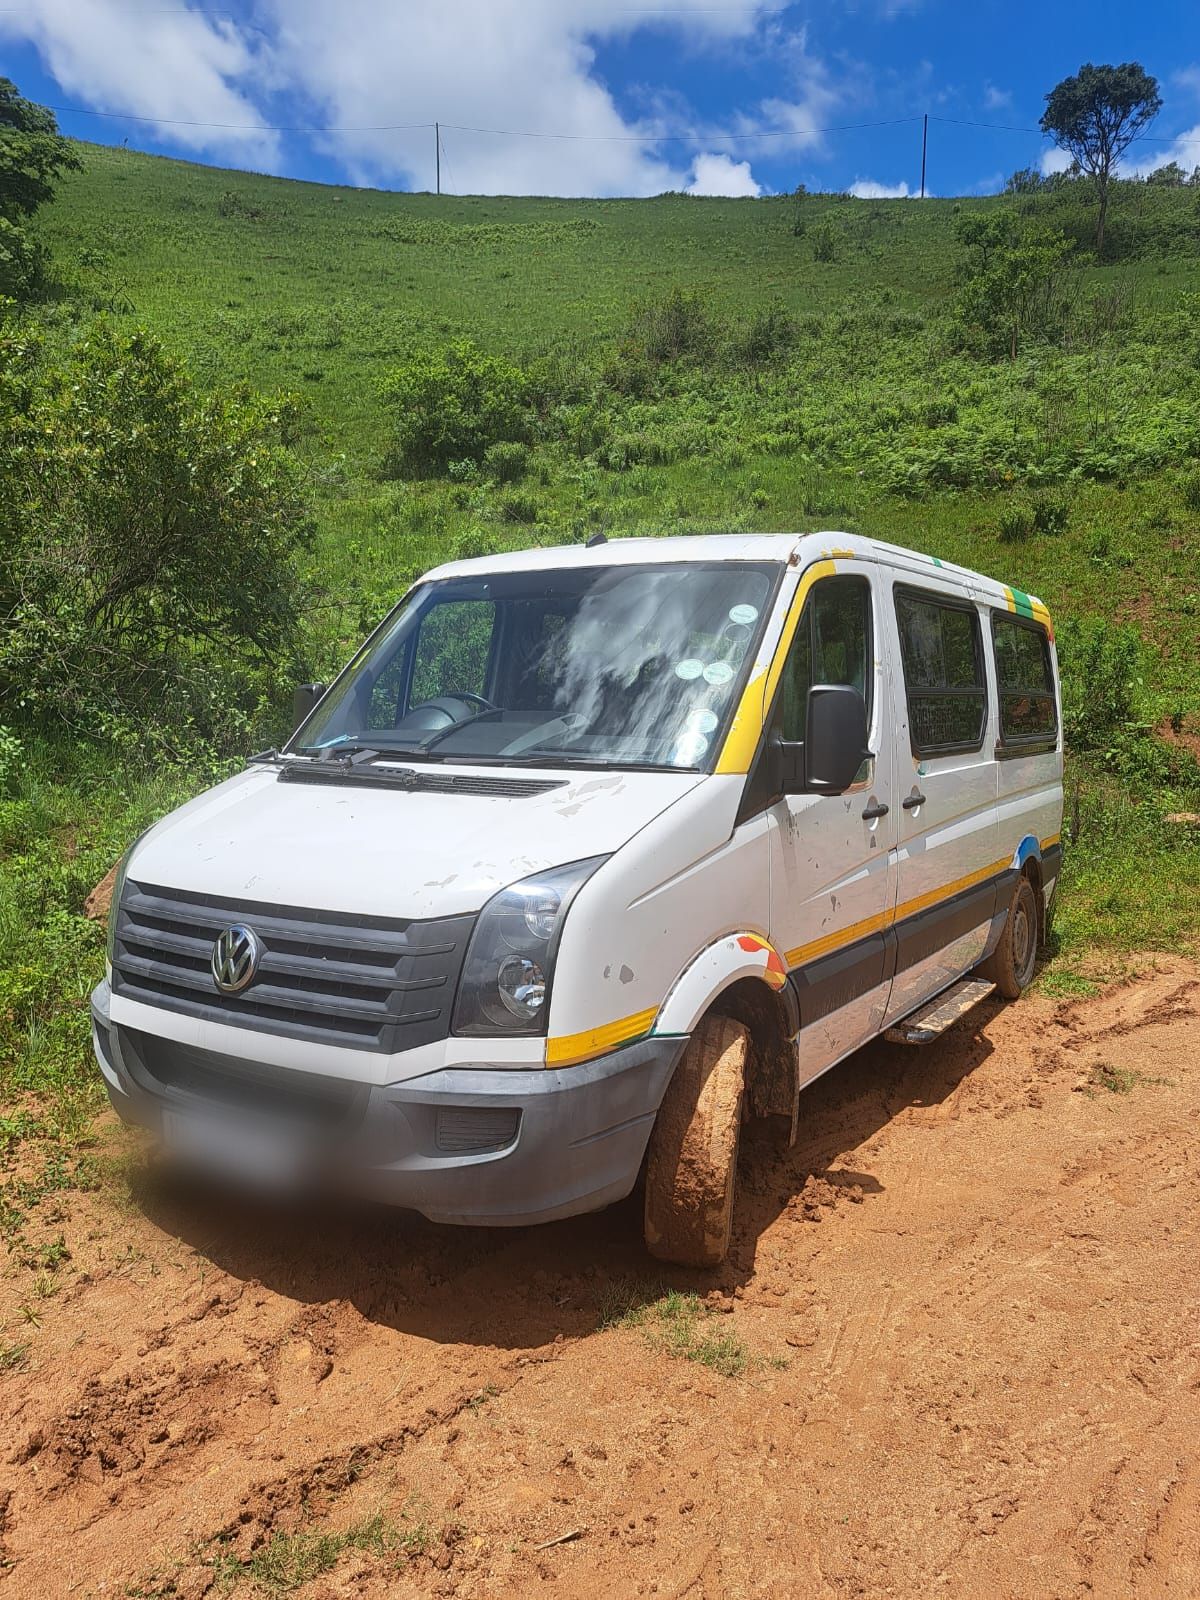 Two hijacked vehicles recovered in Durban North